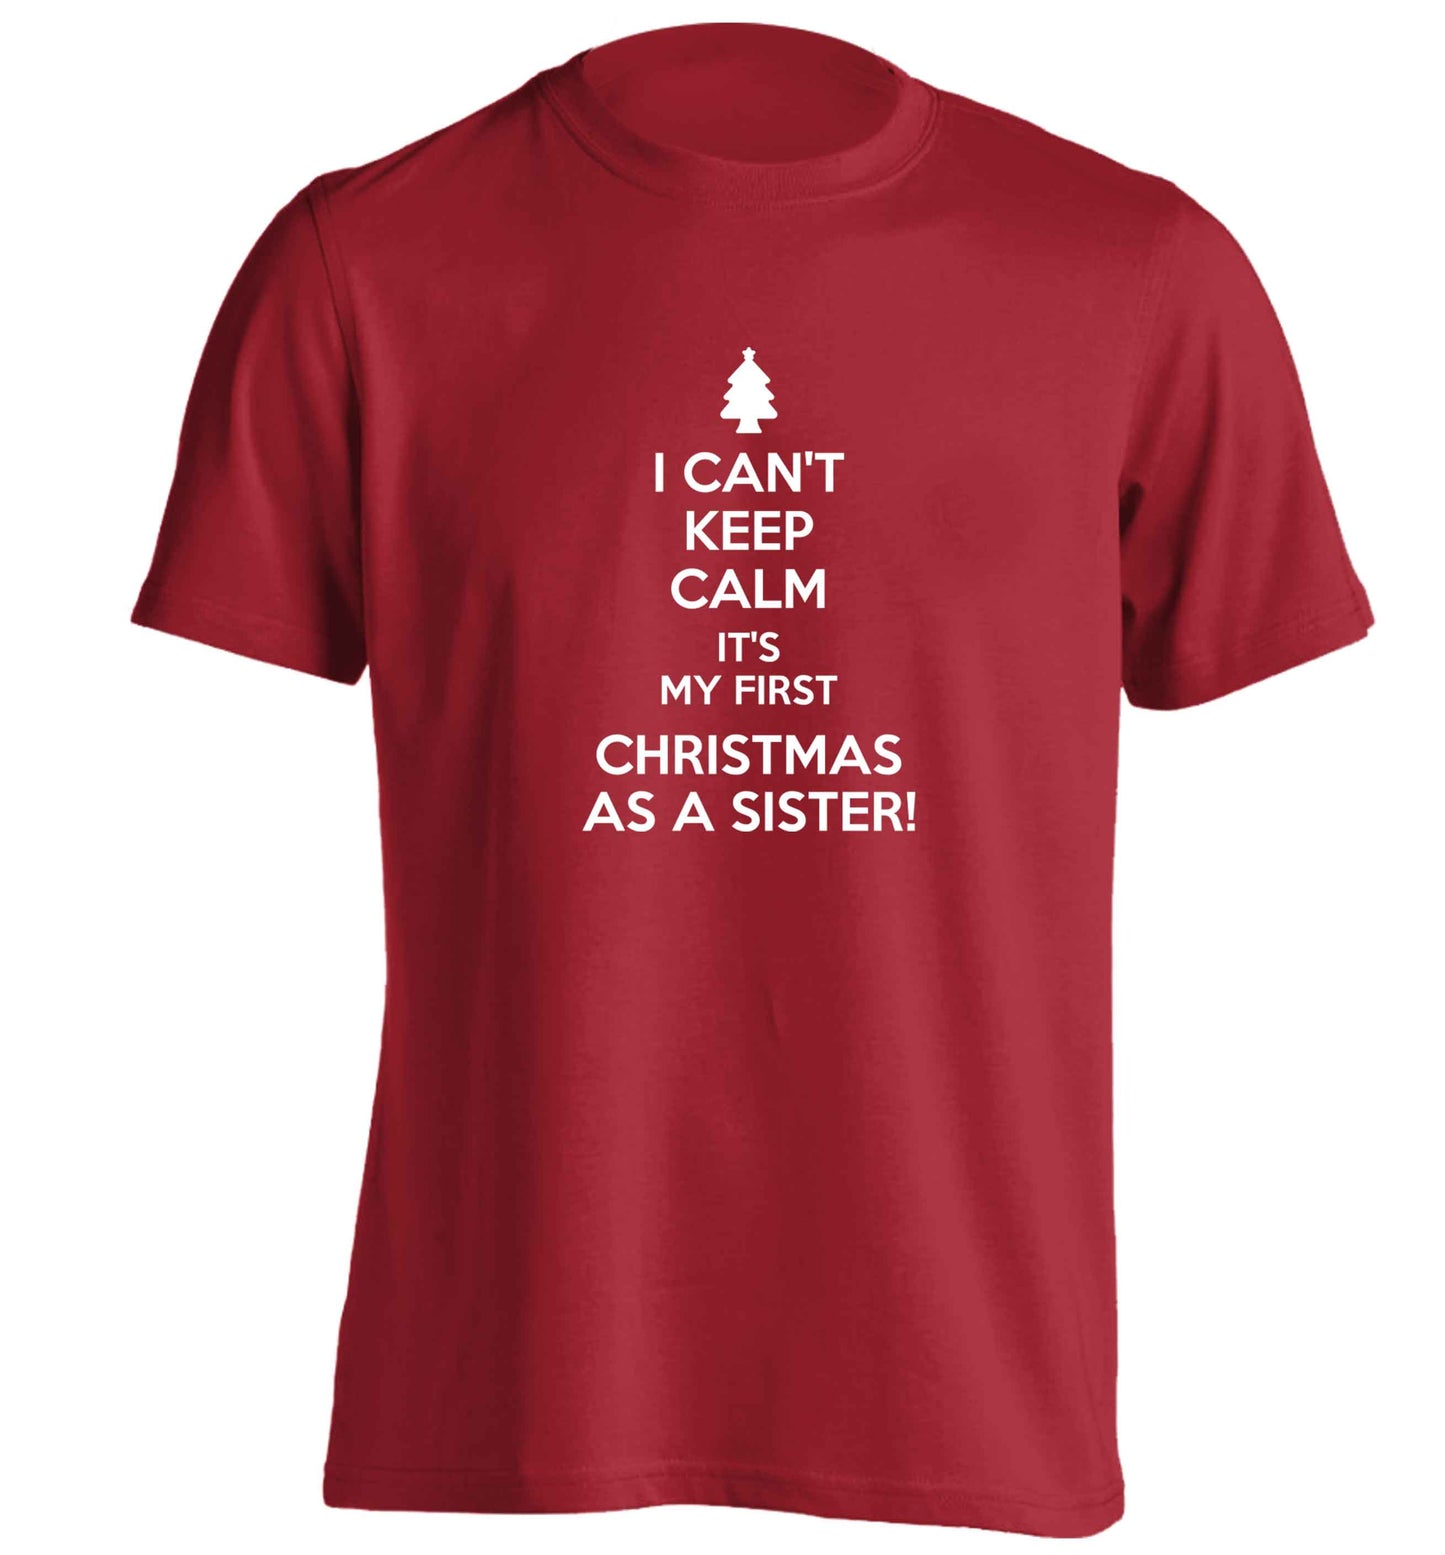 I can't keep calm it's my first Christmas as a sister! adults unisex red Tshirt 2XL